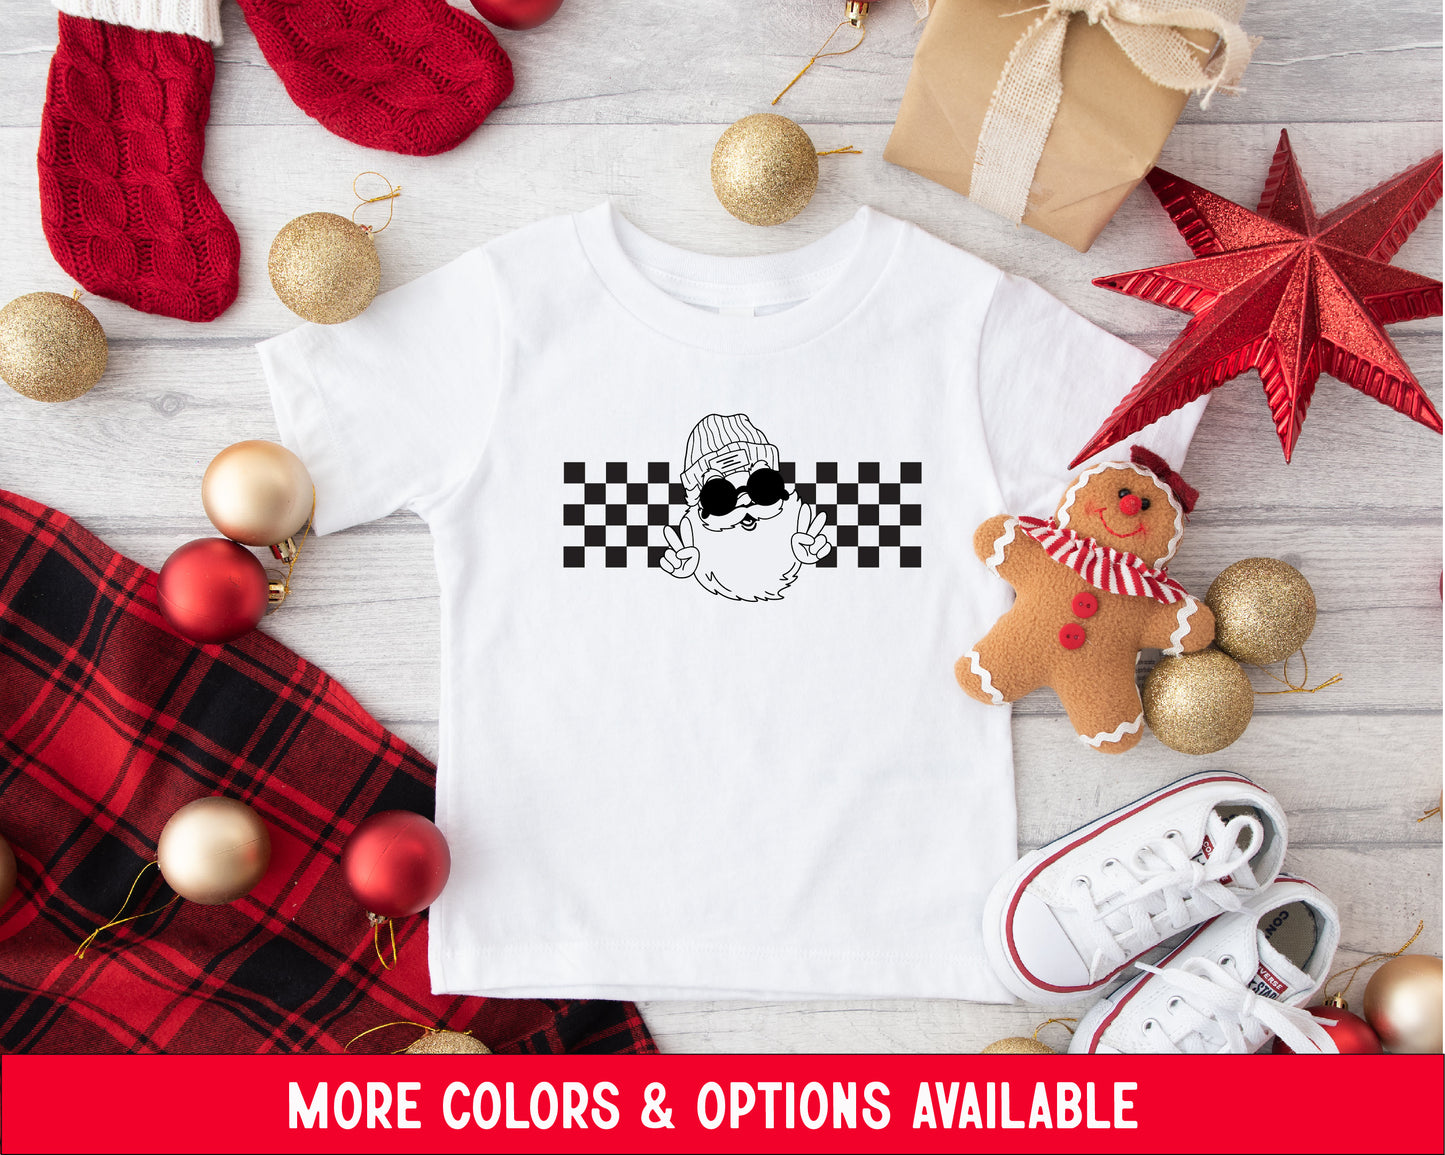 SANTA YOUTH SHIRT <br> More colors available